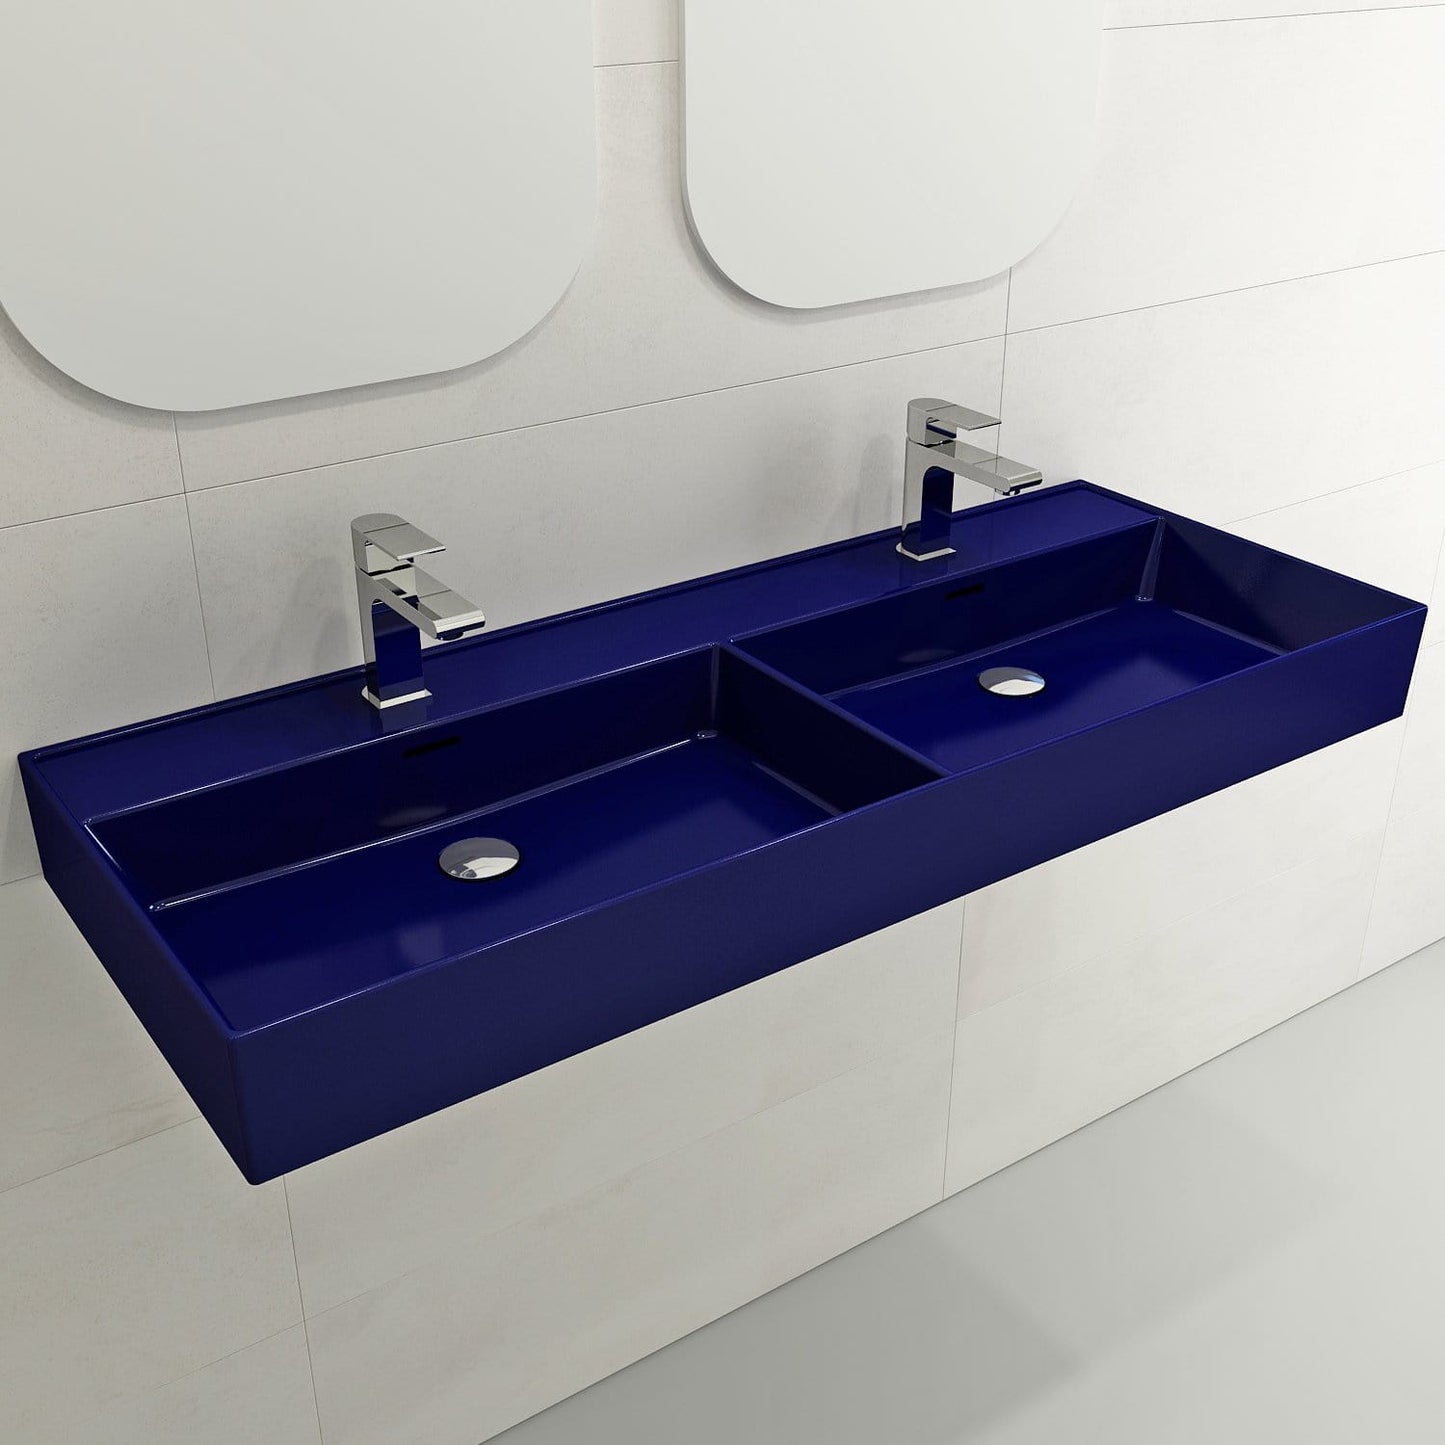 BOCCHI MILANO 47.75" Wall-Mounted Sink Fireclay Double Bowl For Two 1-Hole Faucets With Overflows